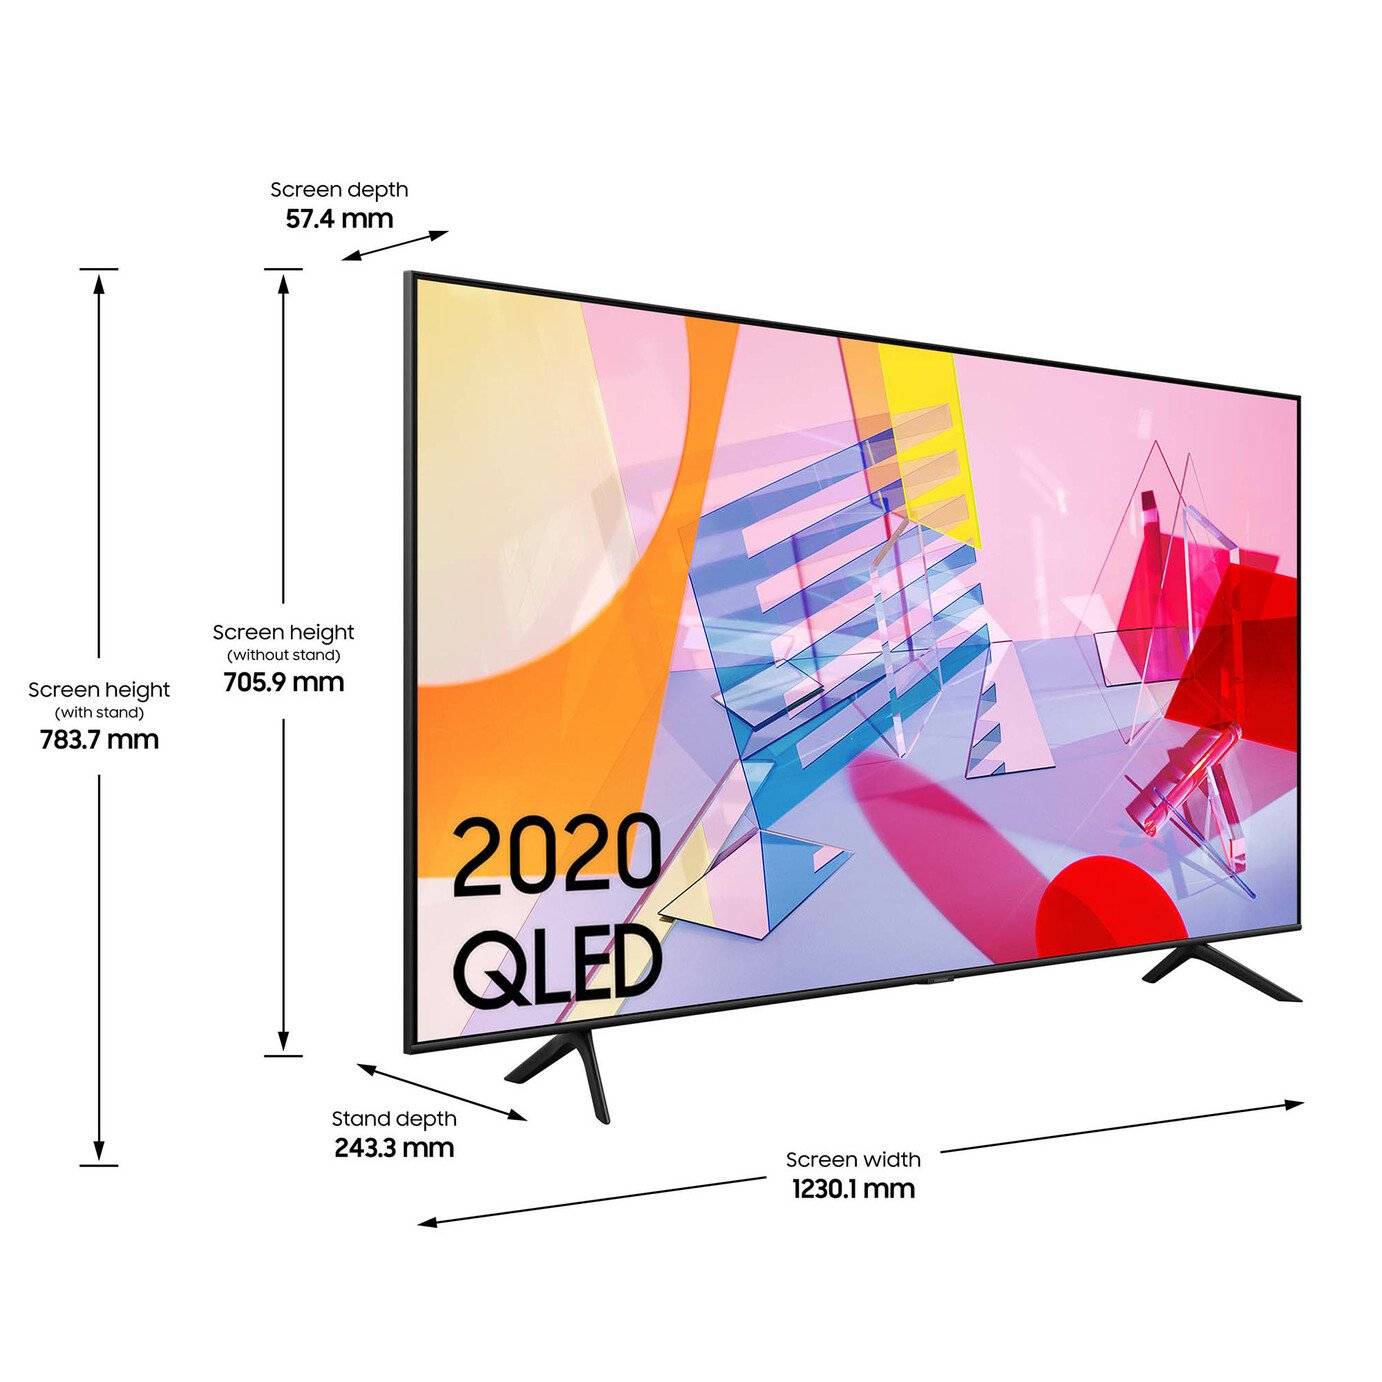 Samsung 55 Inch QE55Q60T Ultra HD QLED TV with HDR Review